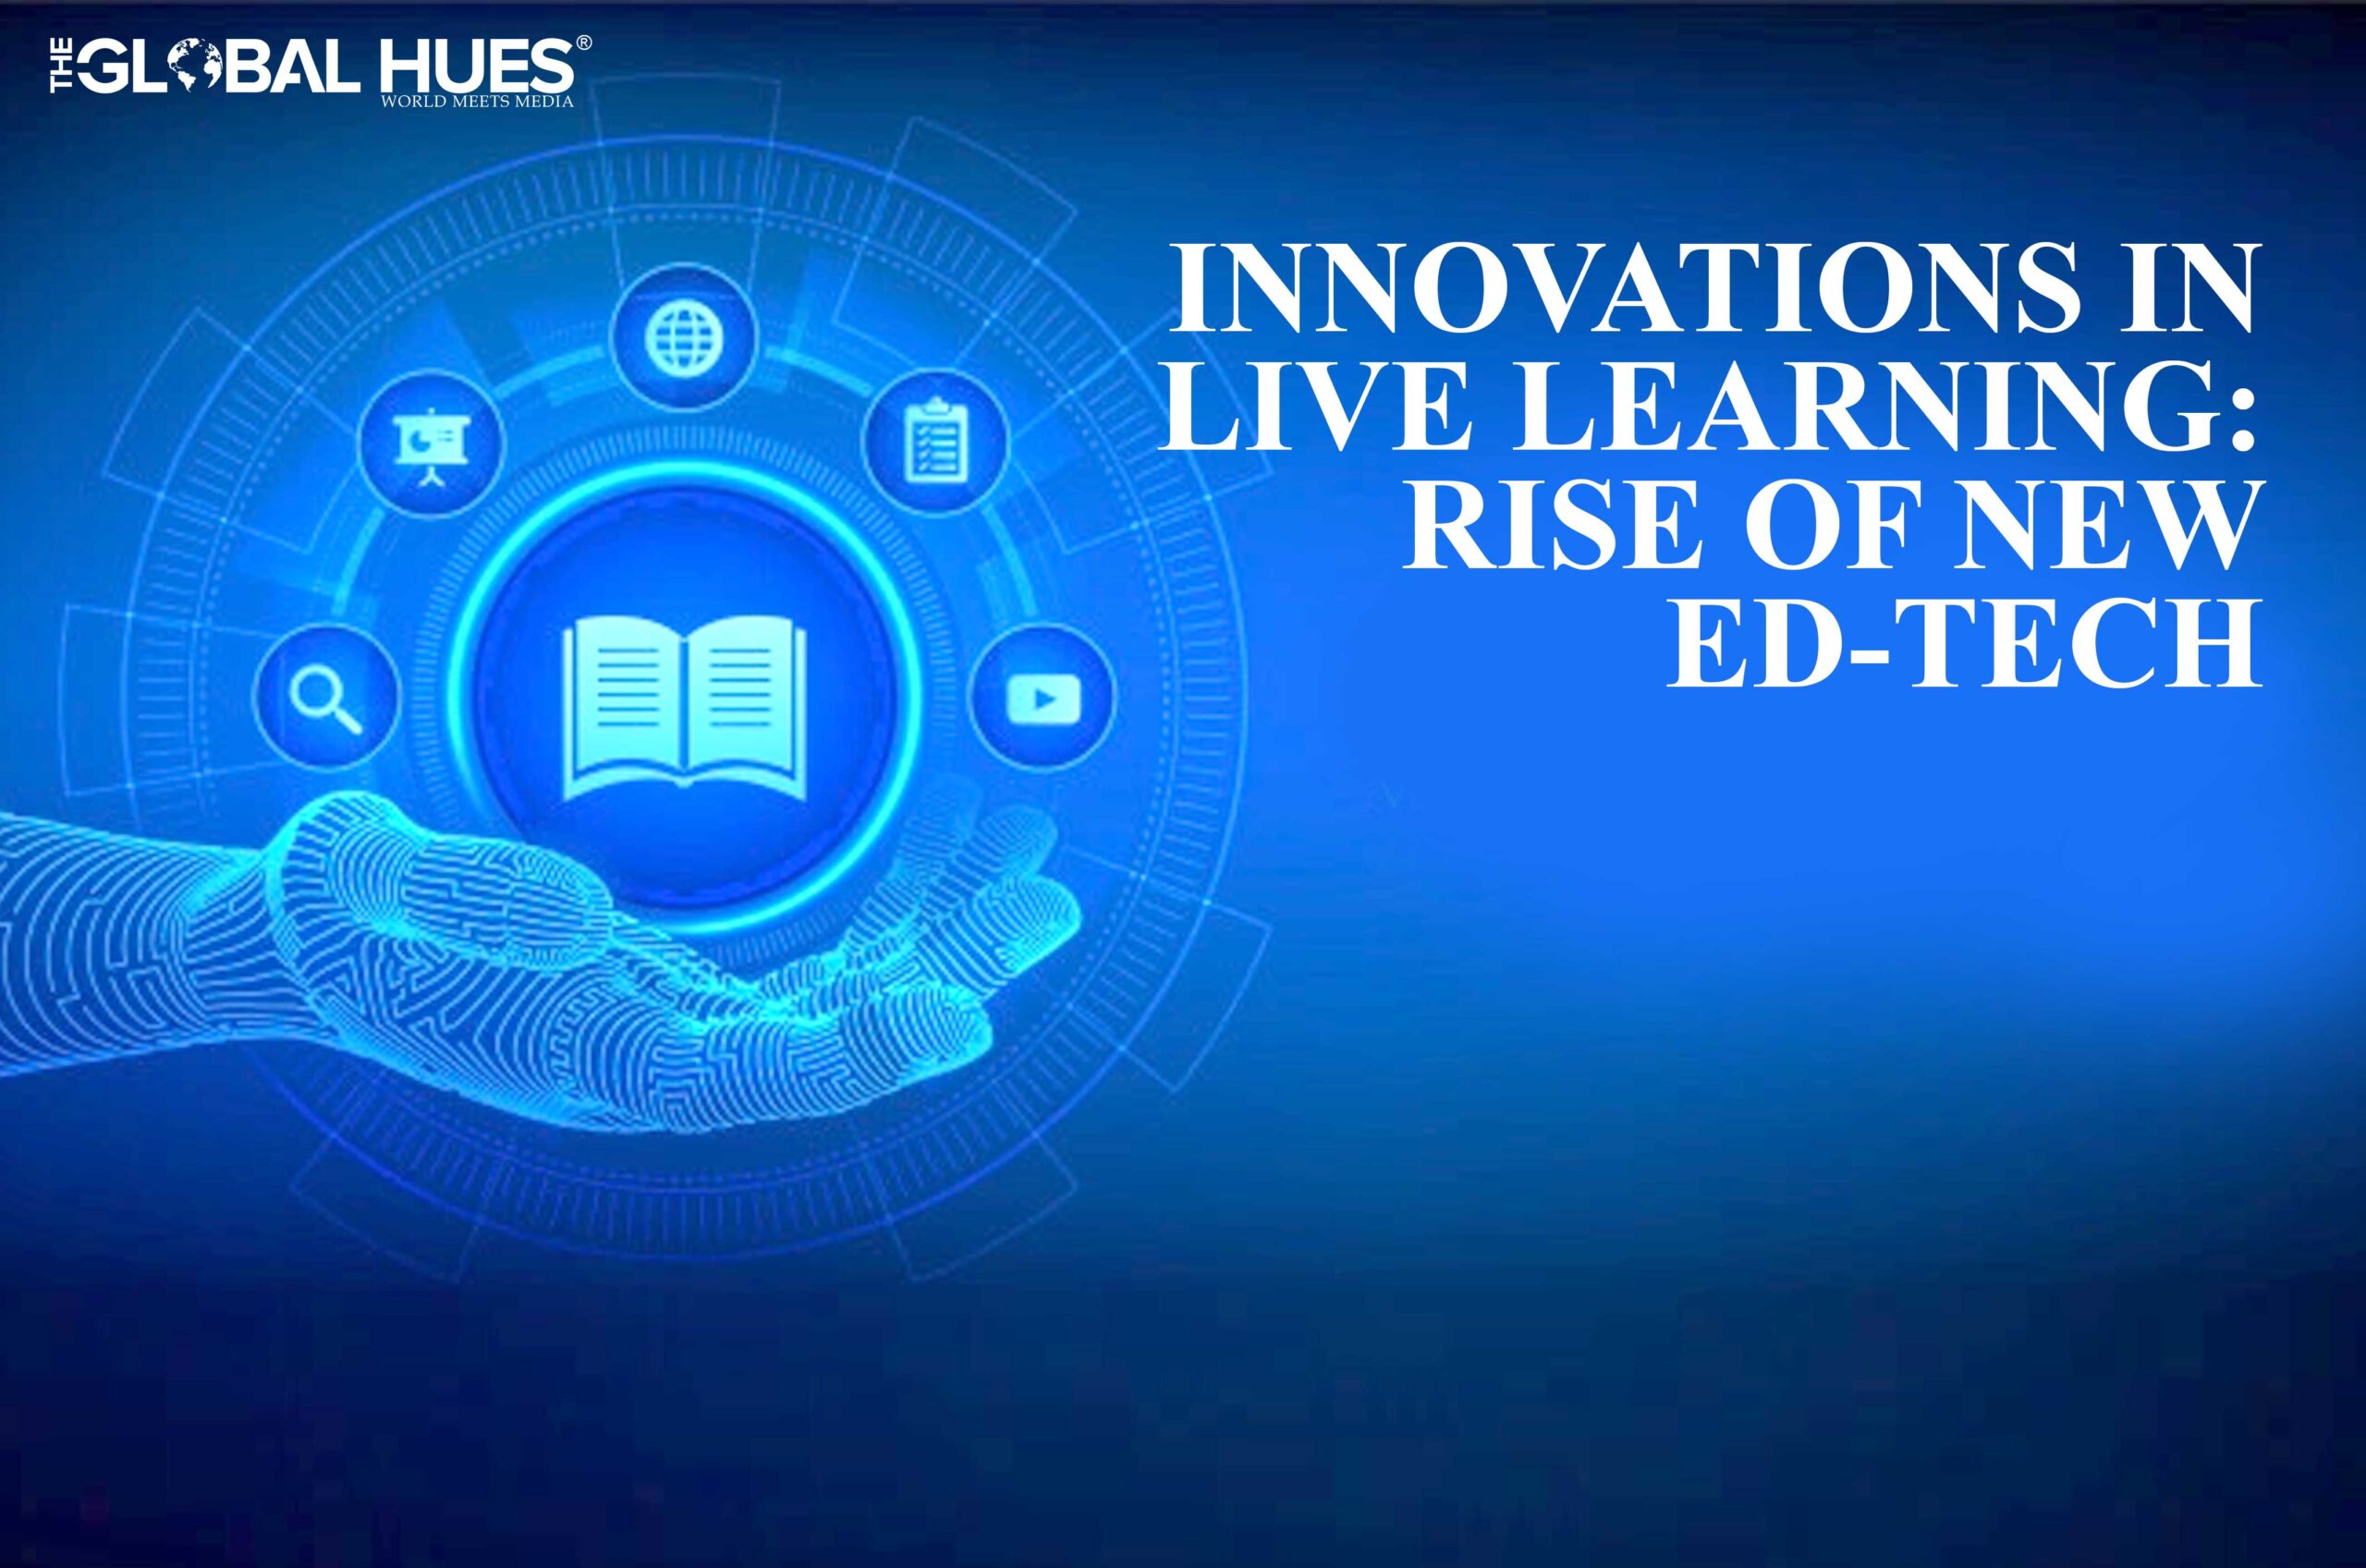 Innovations-in-live-learning-Rise-of-new-ed-tech